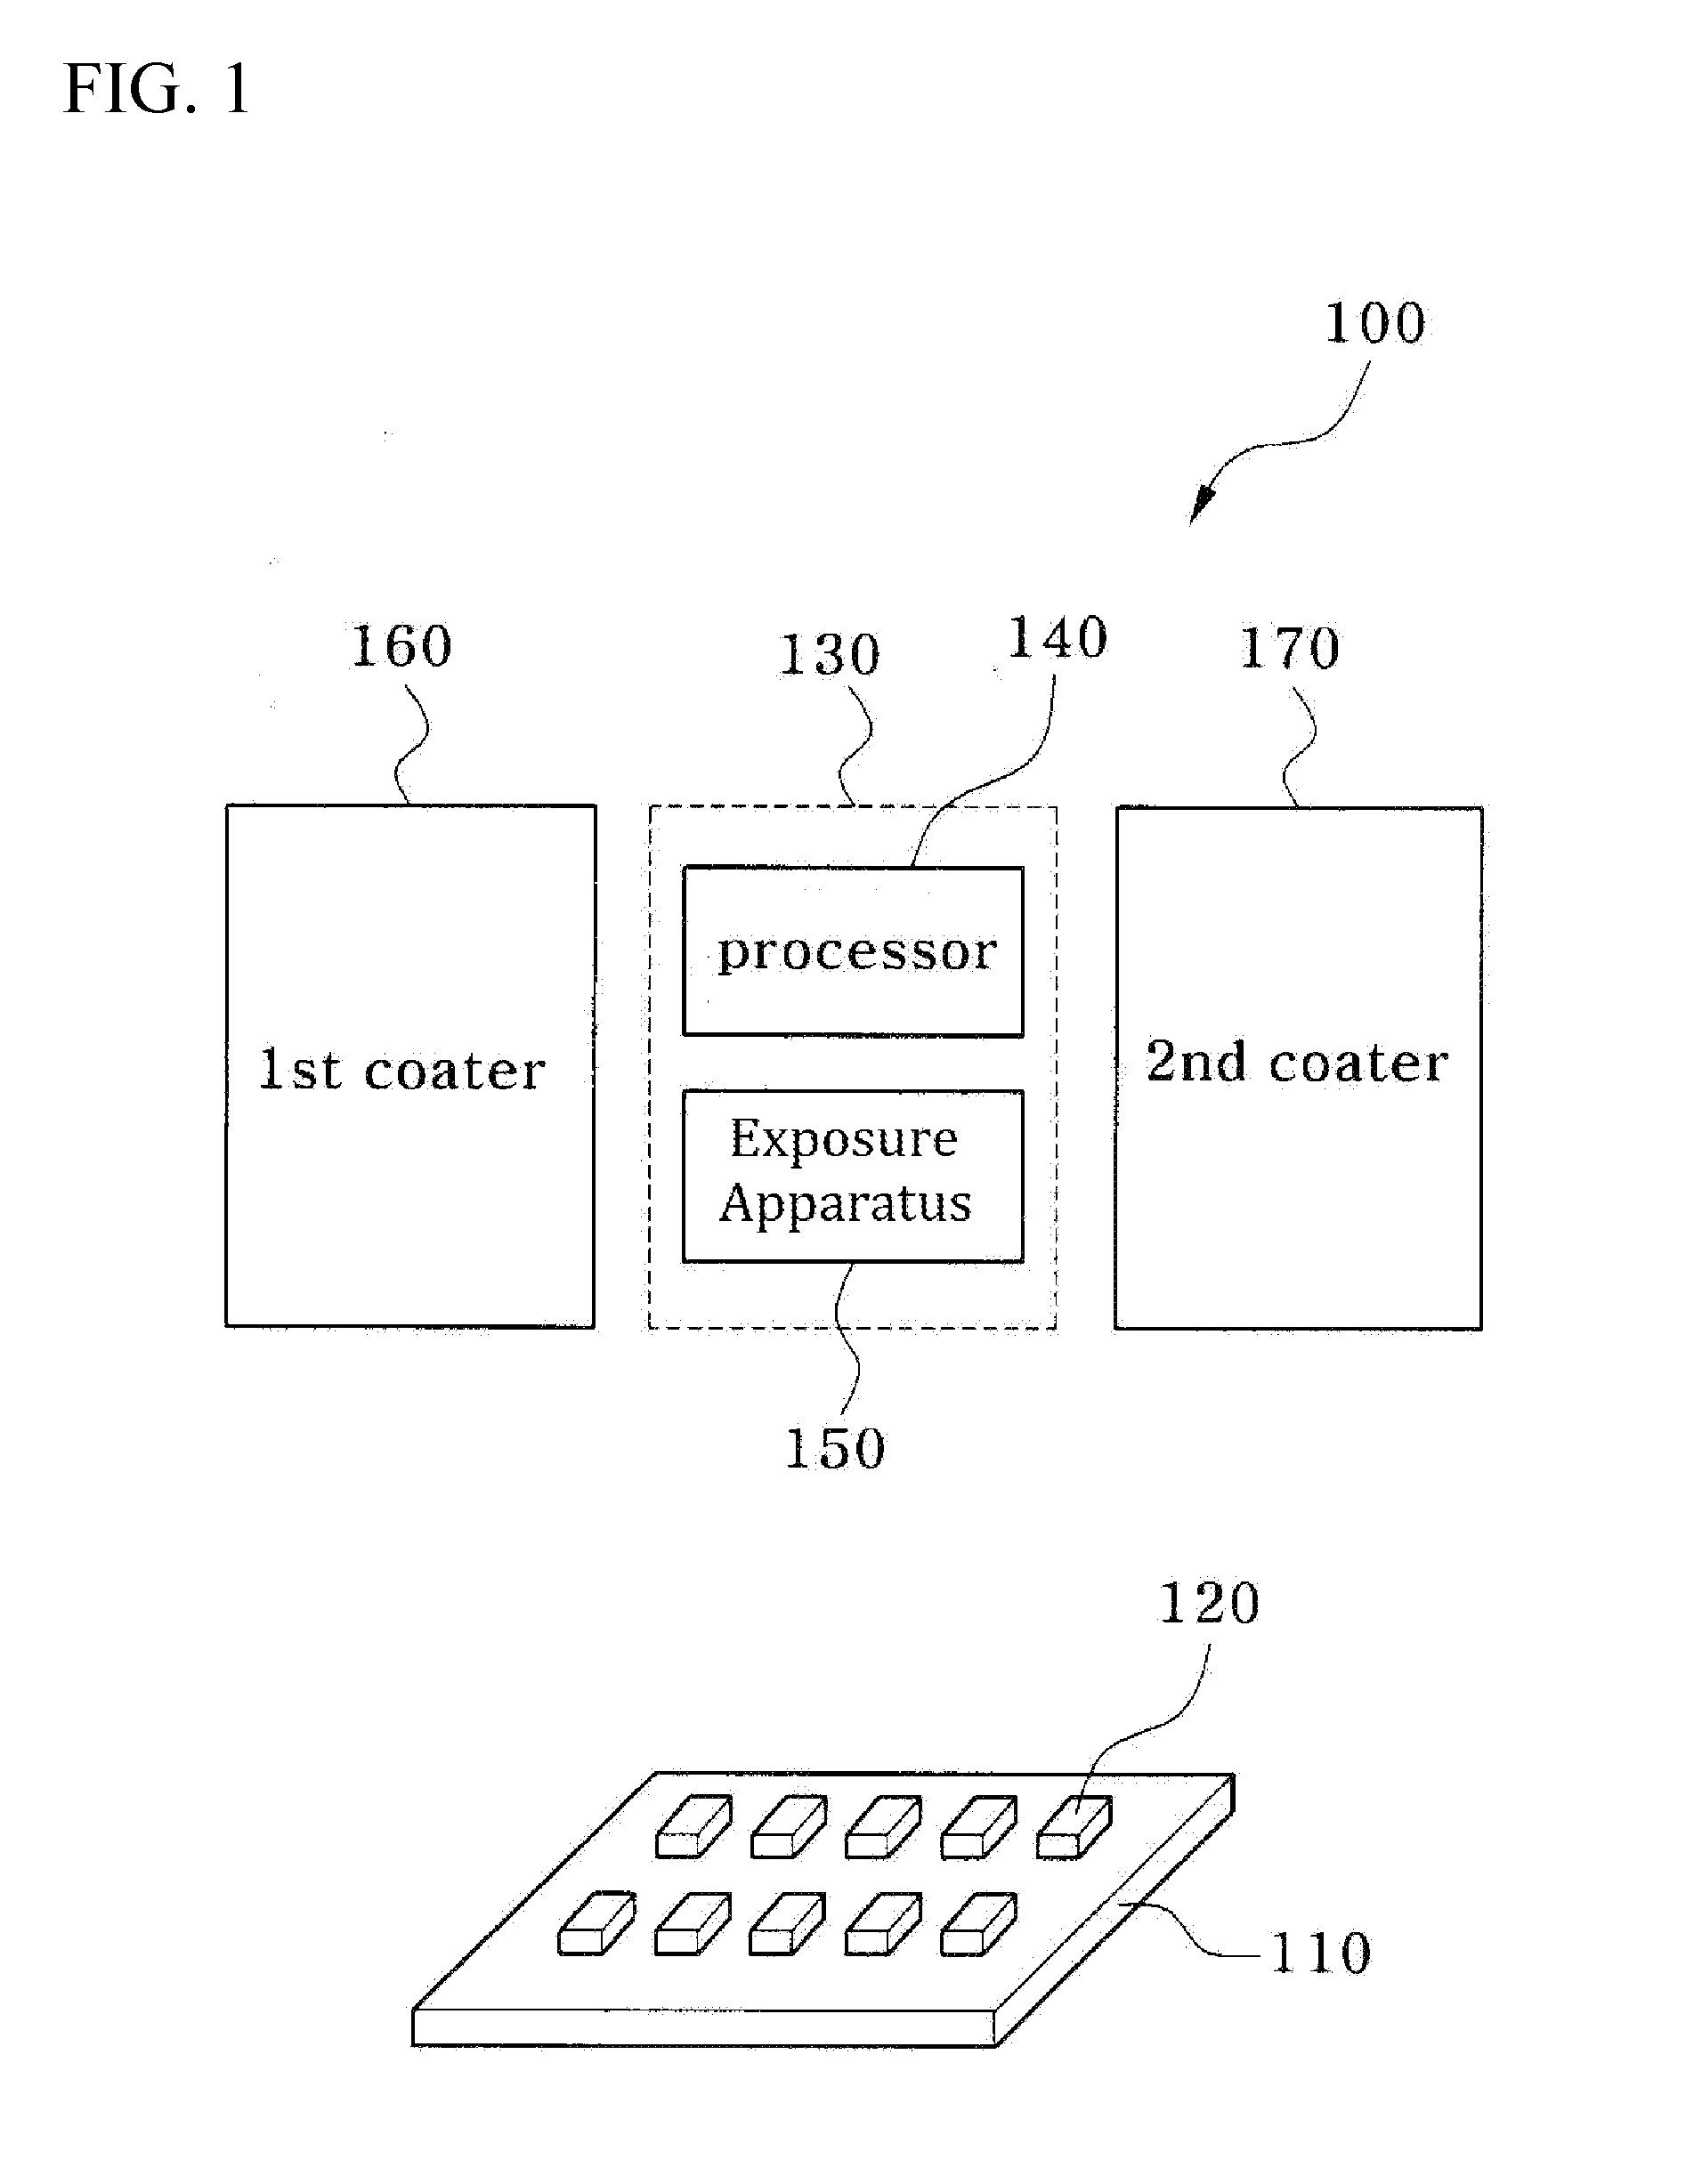 Image processing-based lithography system and method of coating target object